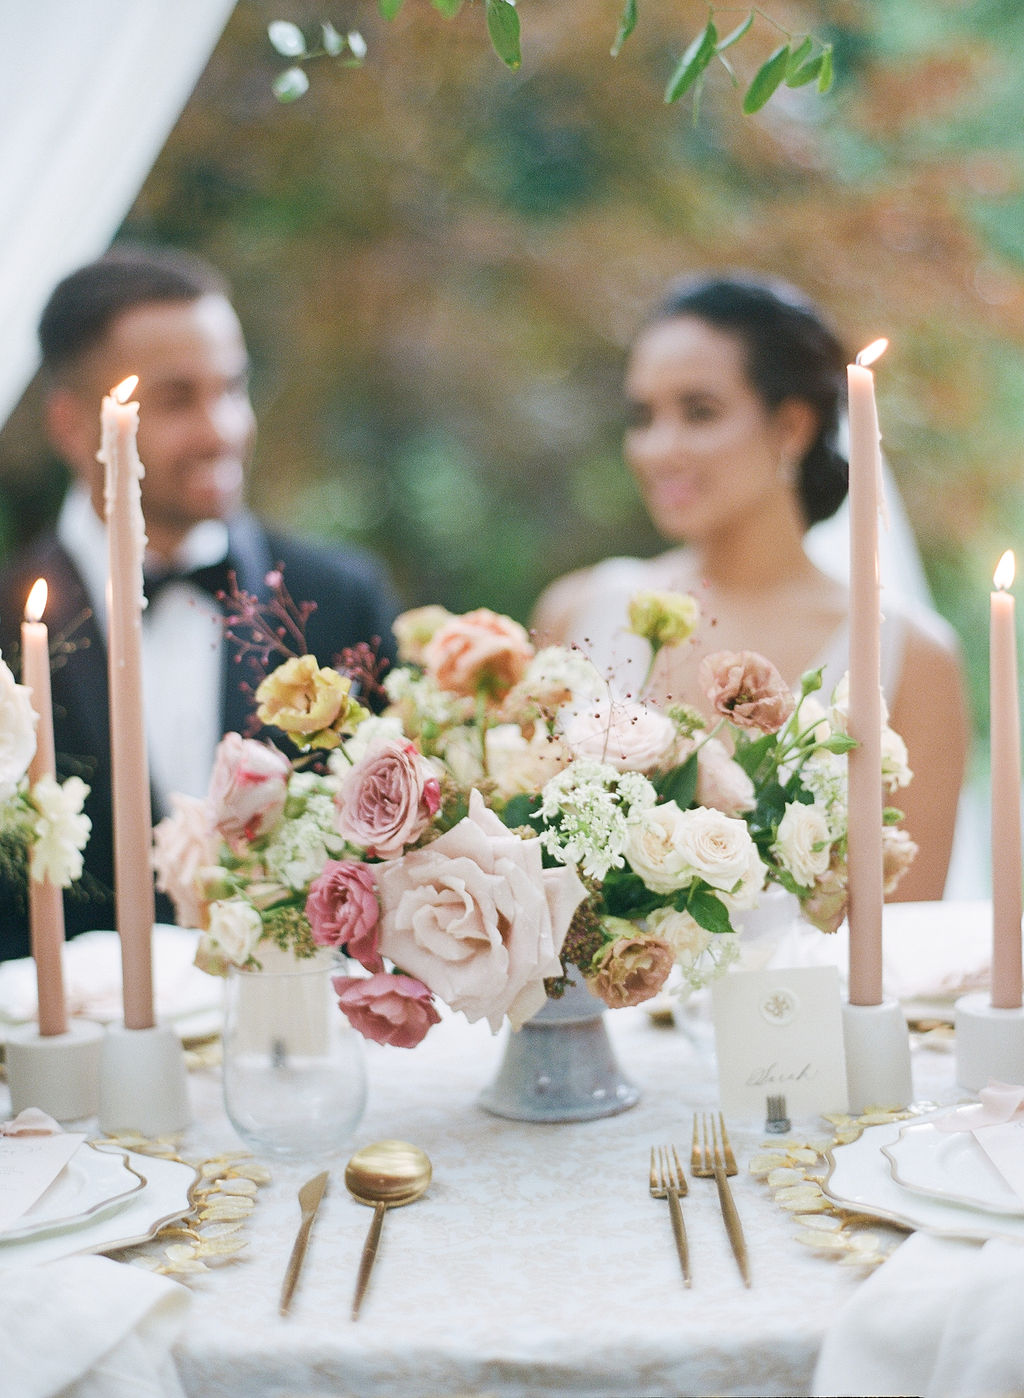 Elegant Microwedding Inspiration by Molly Carr Photography | Al Fresco Tented Dinner with Chandeliers & Flower Arch